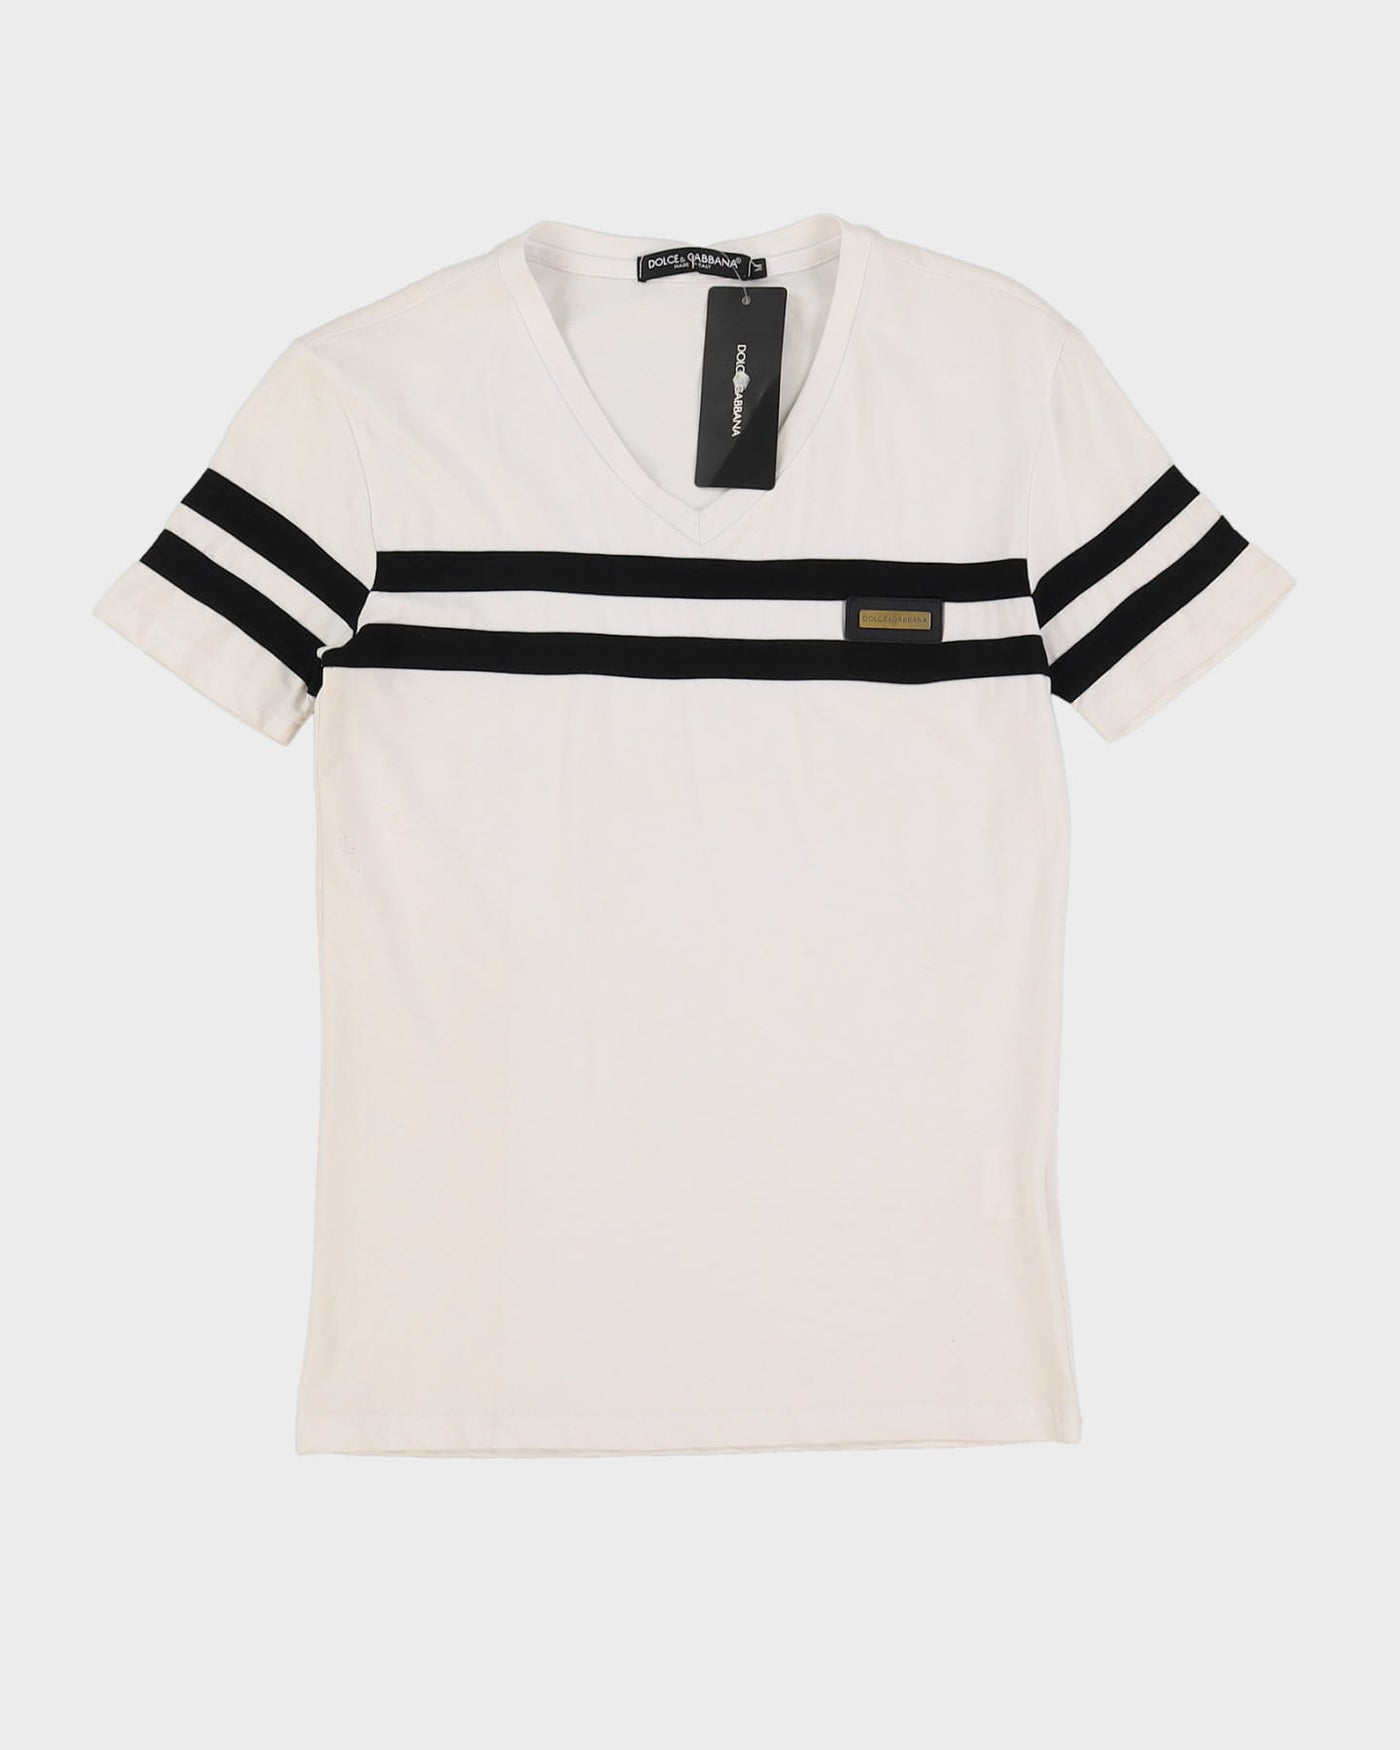 Deadstock With Tags Dolce & Gabbana White T-Shirt - M